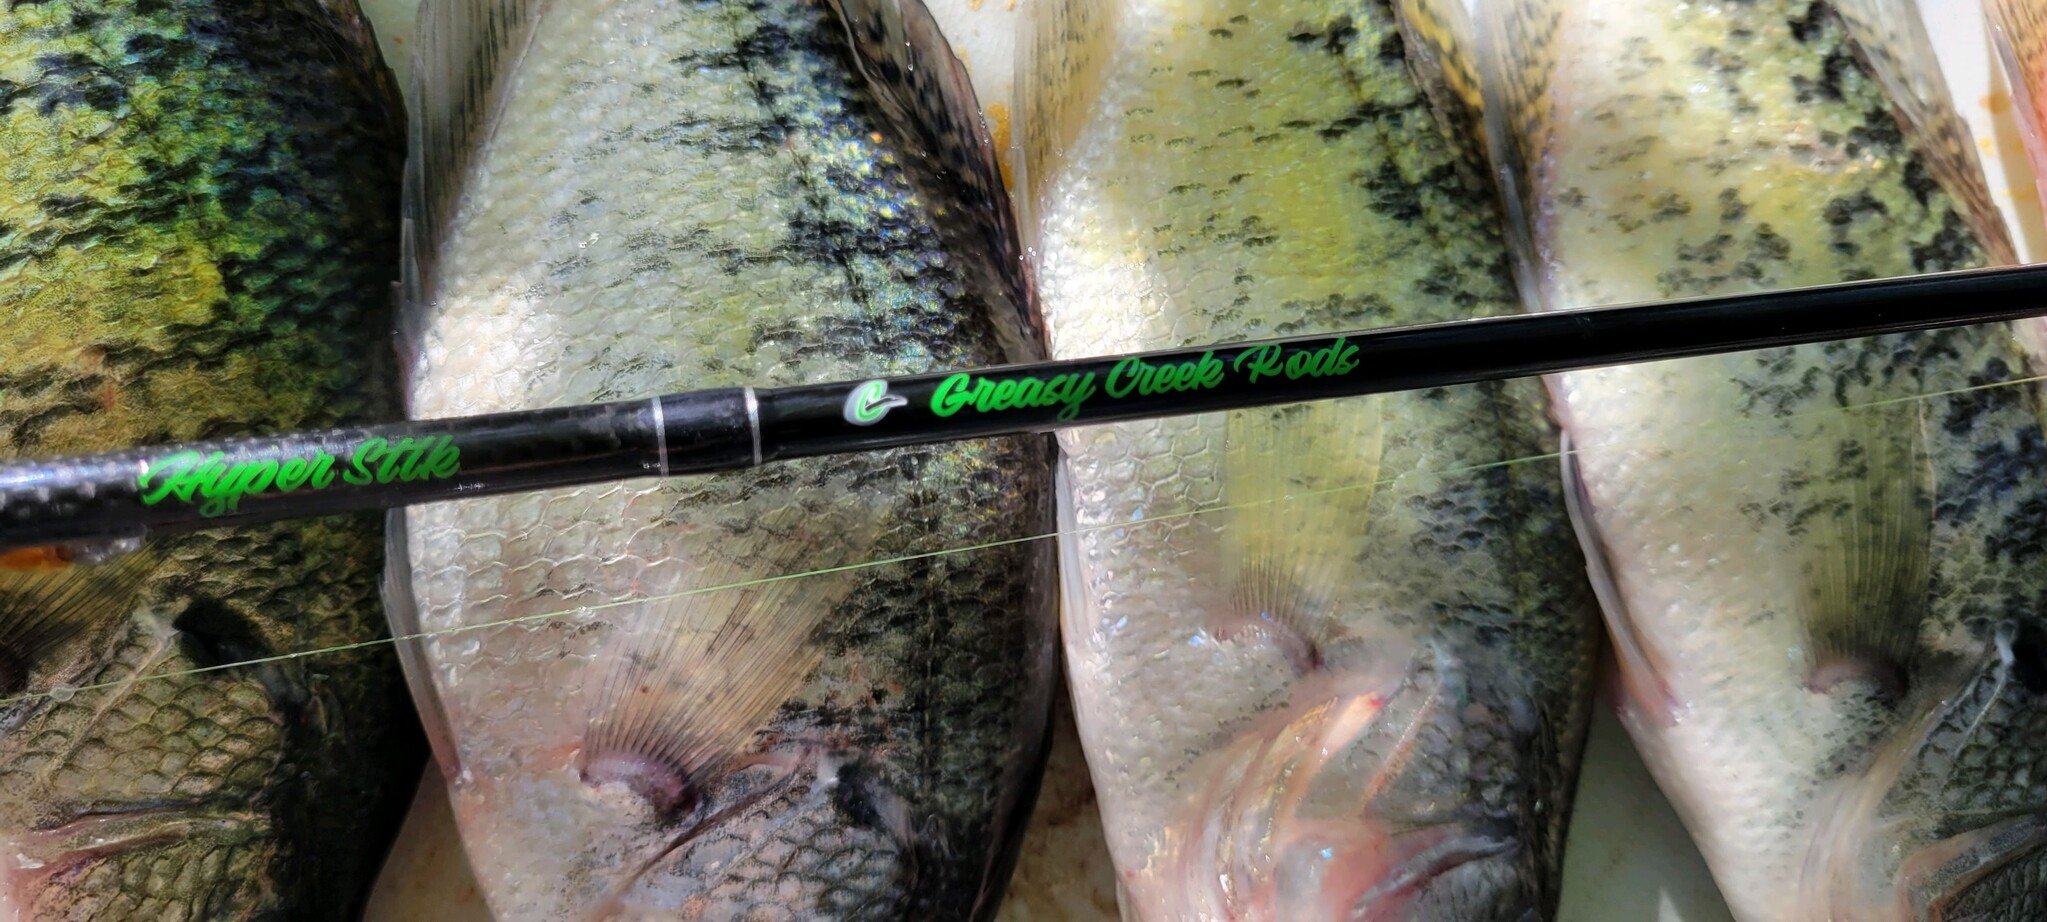 CRAPPIE RODS SPINNING - Gellco Outdoors